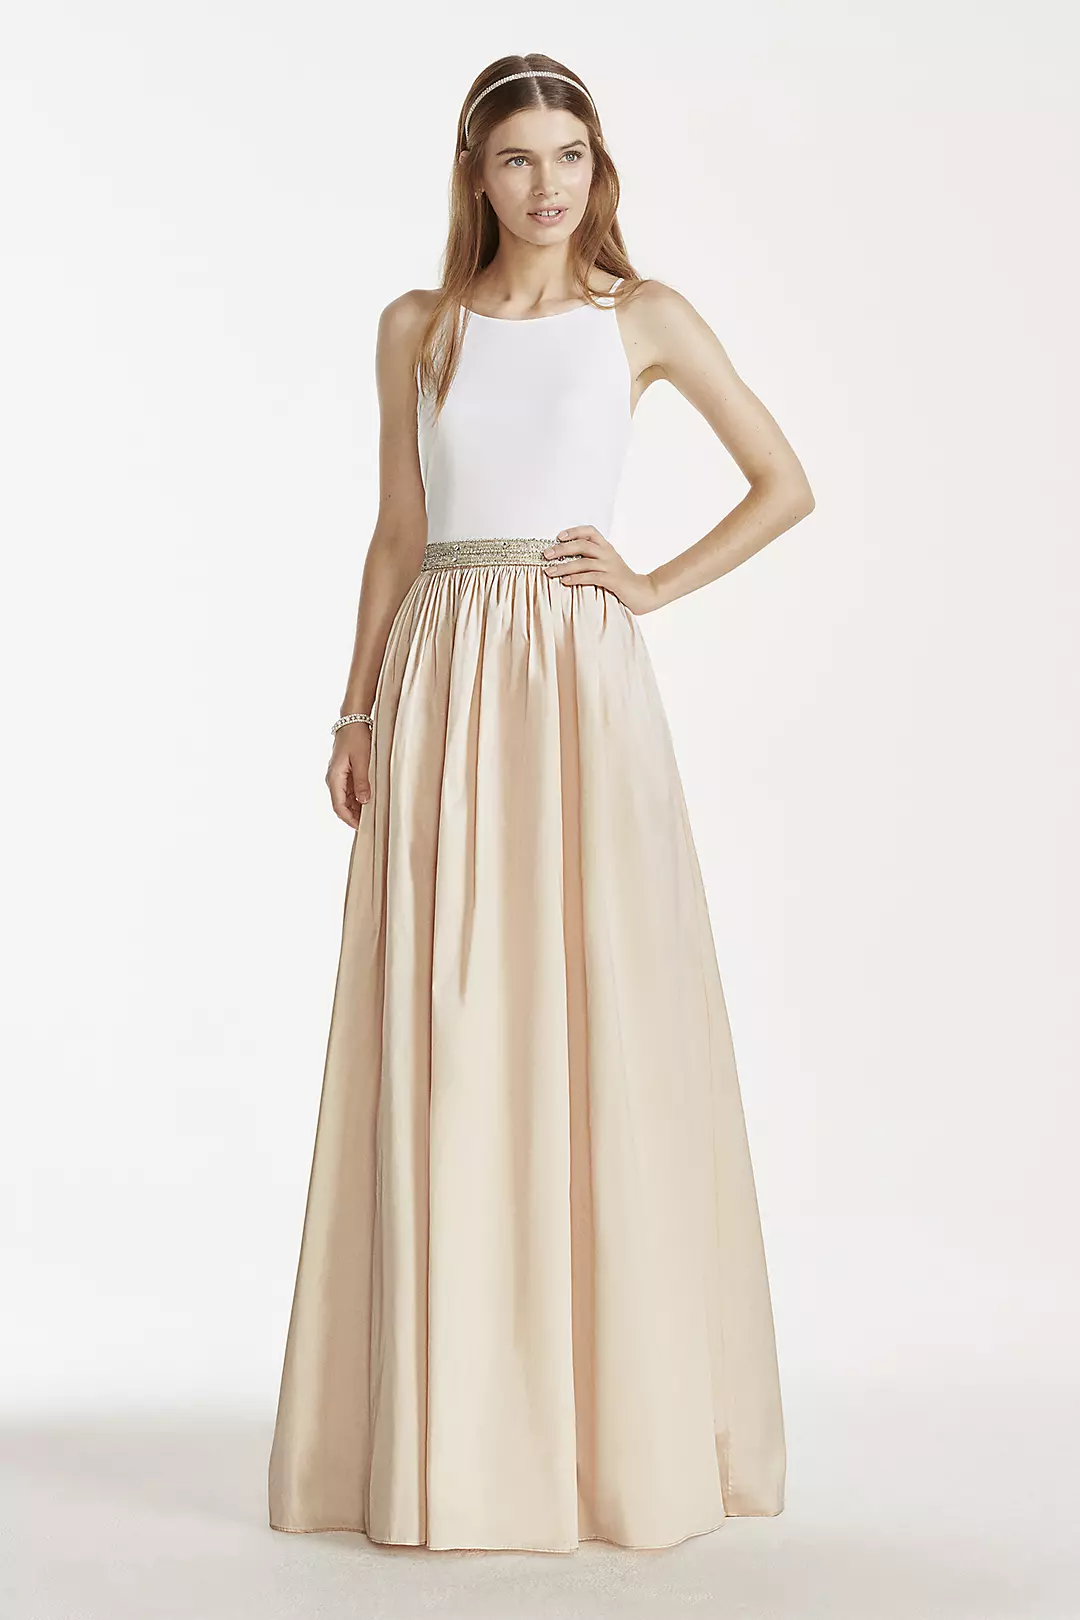 Tank Gown with Beaded Waistband and Ballgown Skirt Image